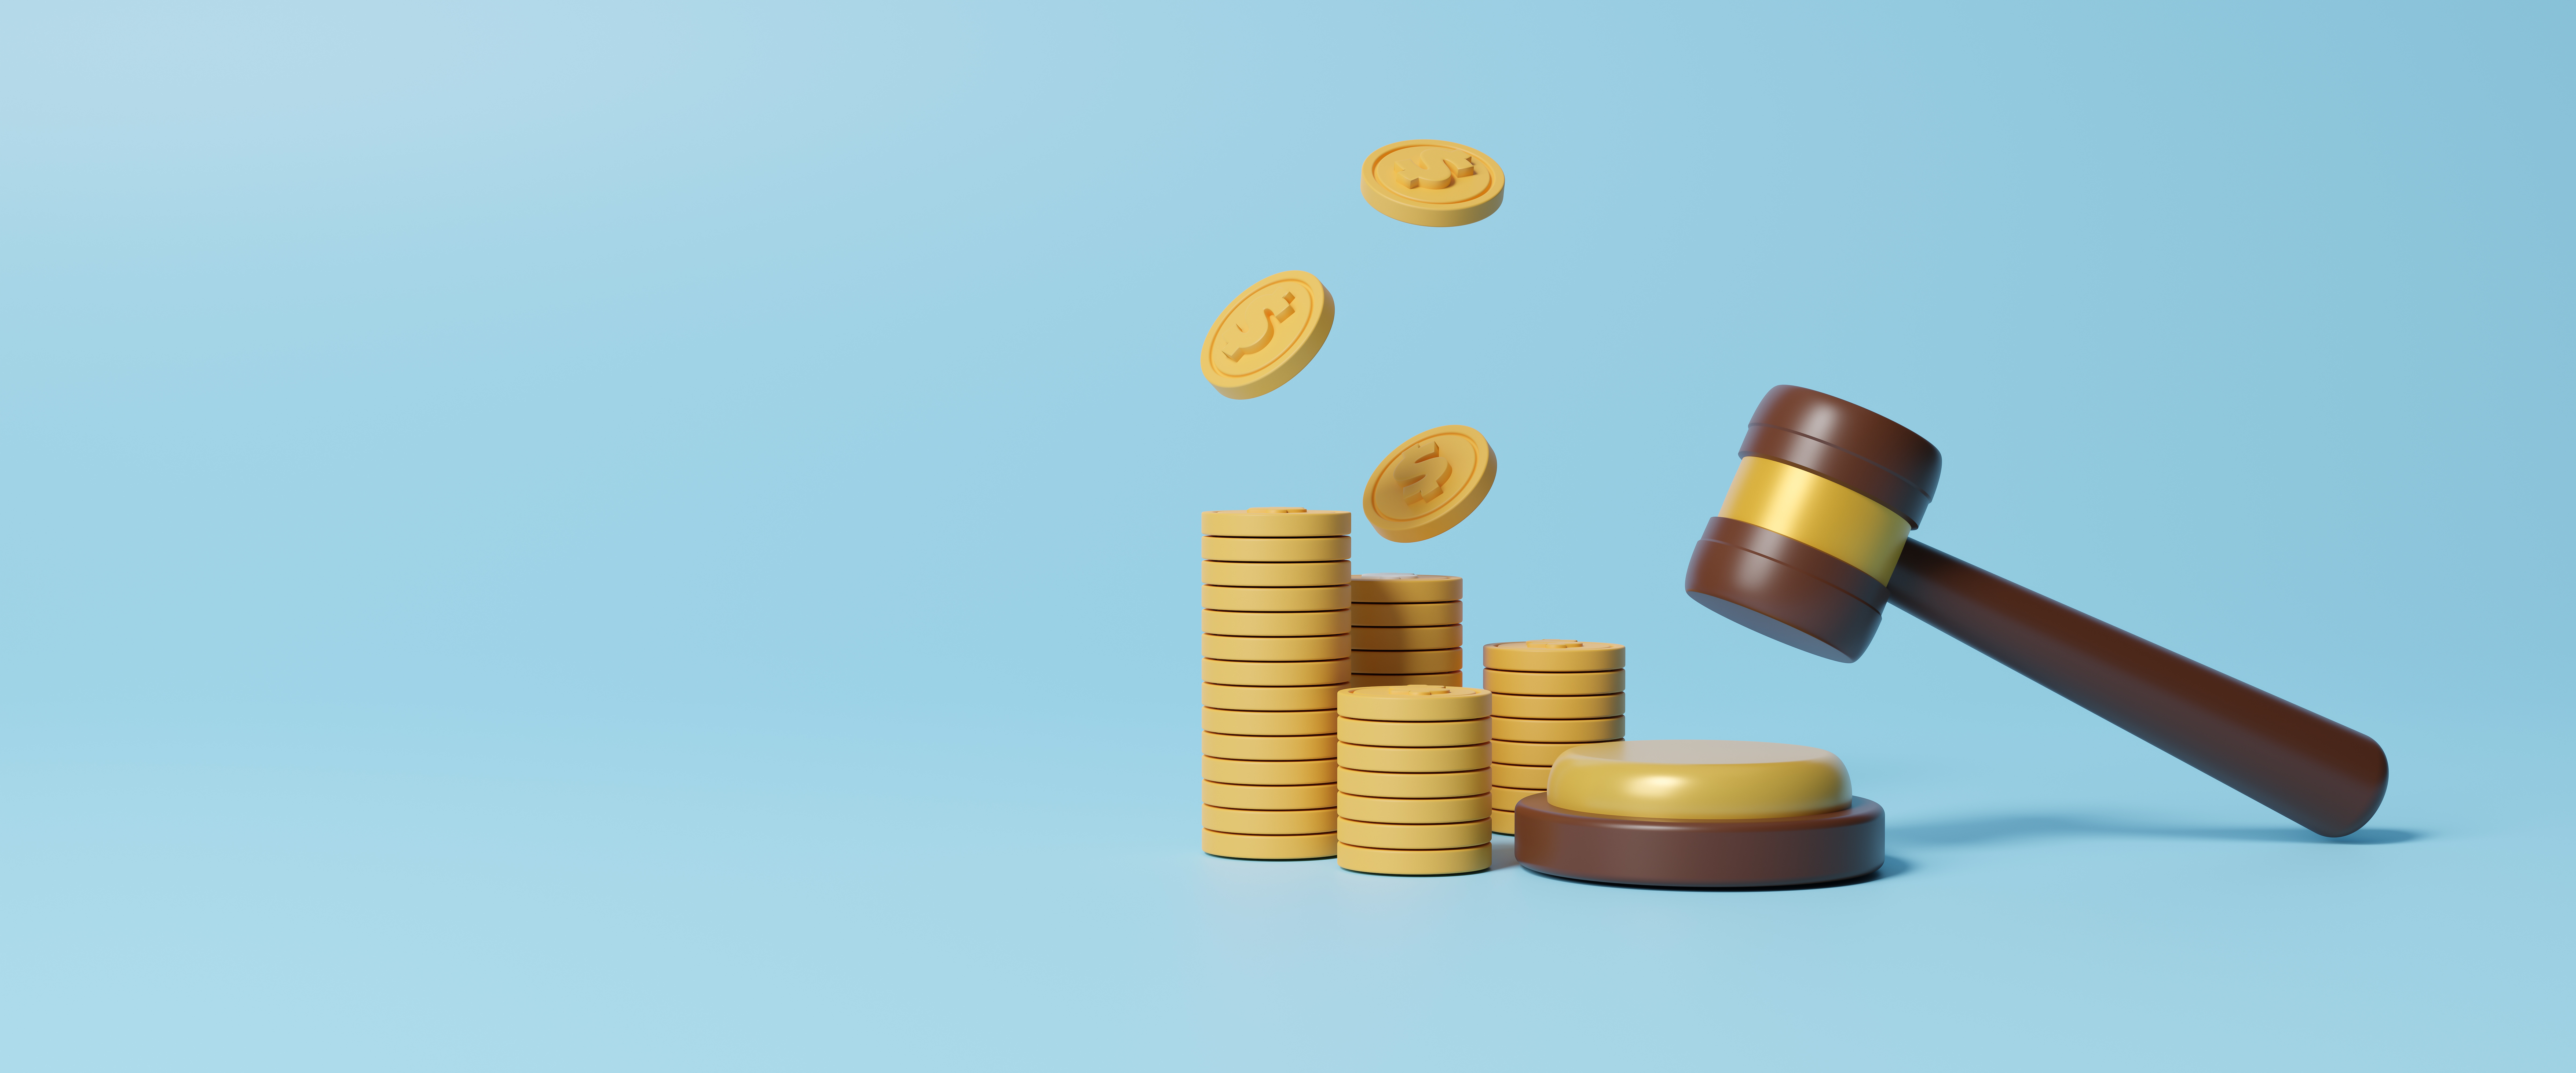 A gavel is flying over stacks of coins on a blue background.